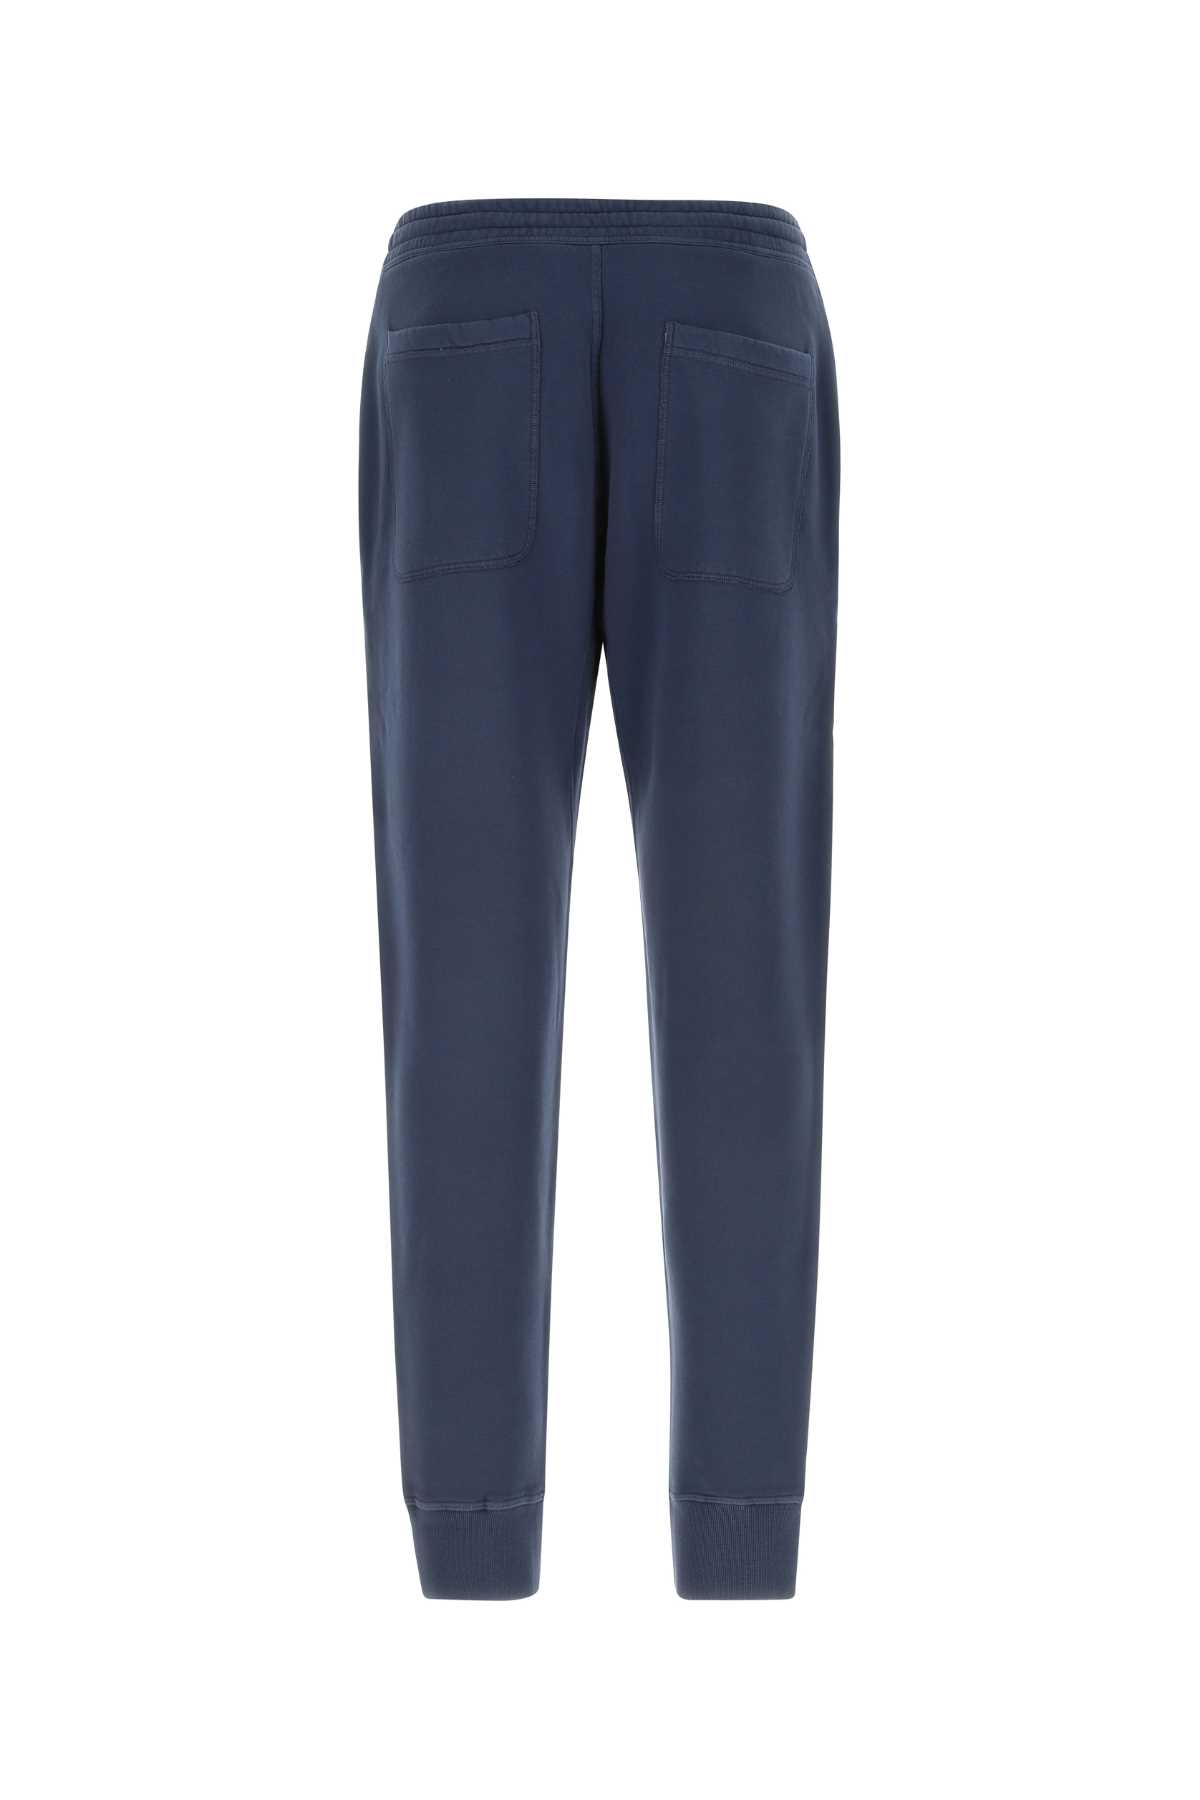 Tom Ford Blue Cotton Joggers In B45